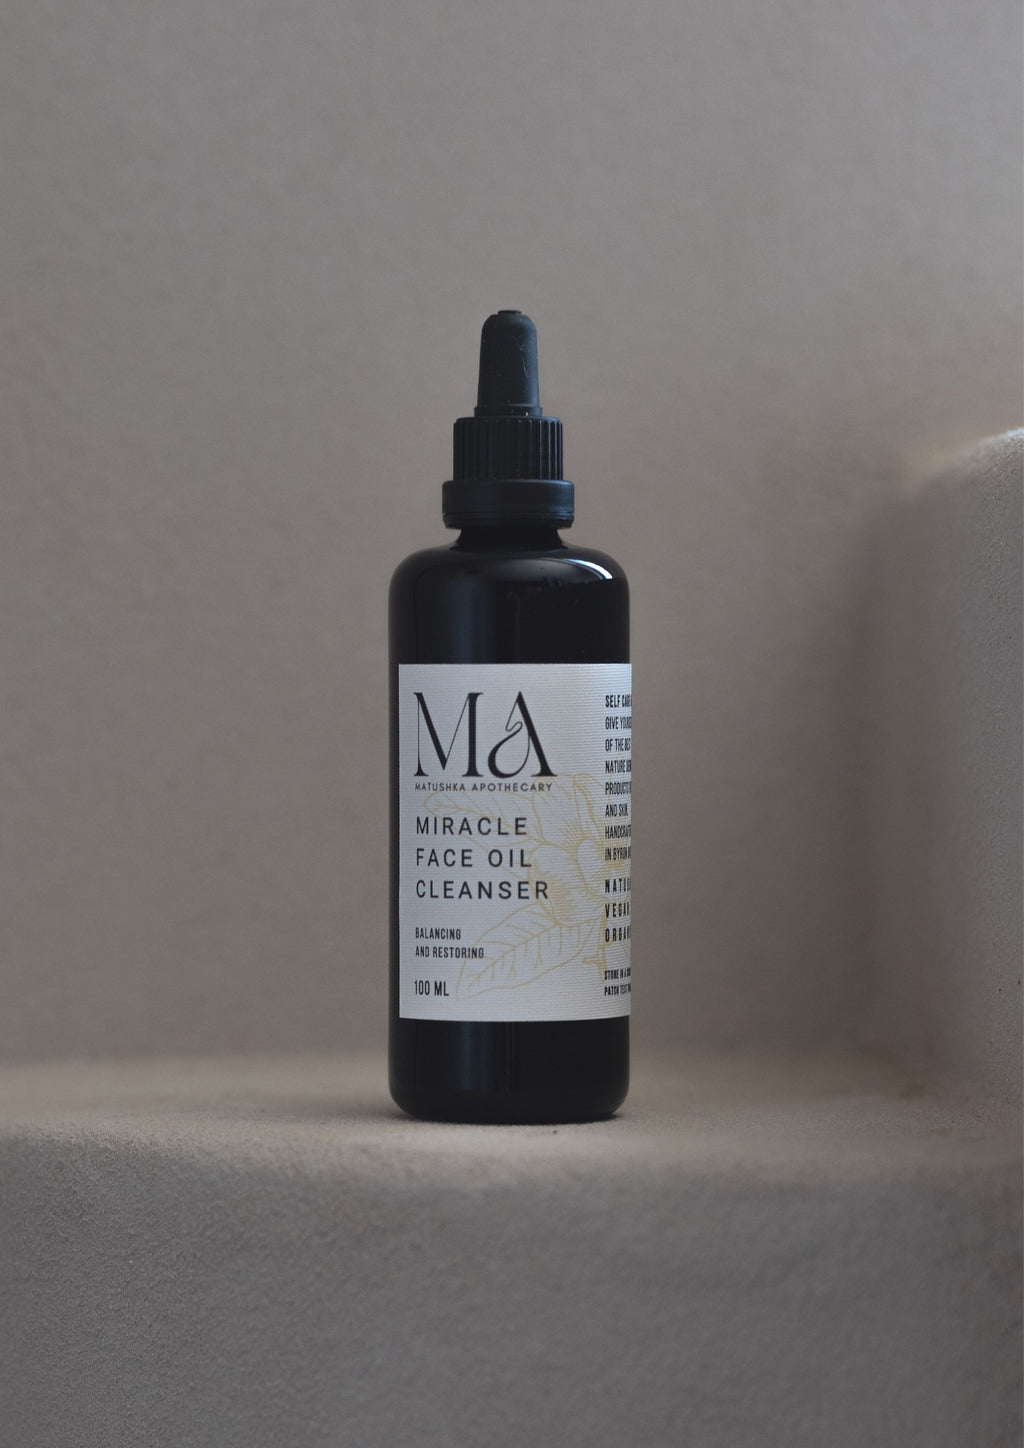 Miracle Oil Face Cleanser - Matushka Apothecary